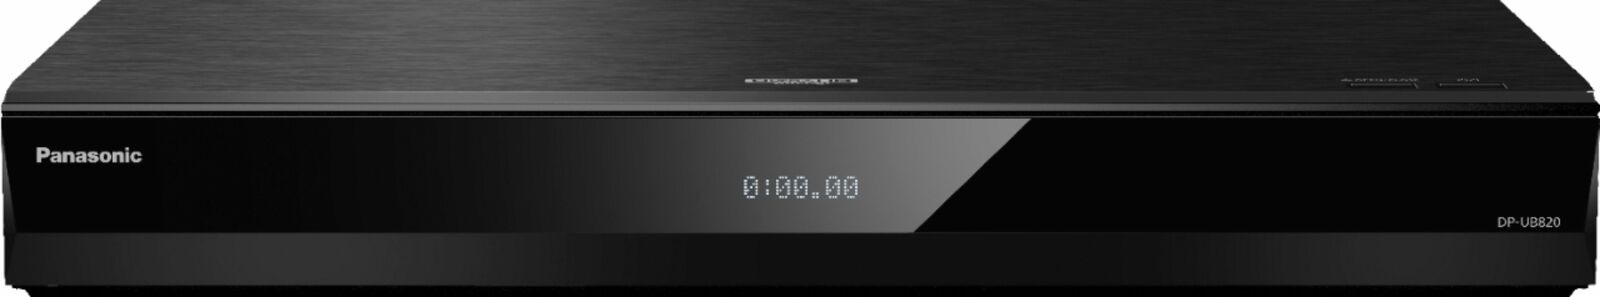 Panasonic - Streaming 4K Ultra HD Hi-Res Audio with Dolby Vision 7.1 Channel ...